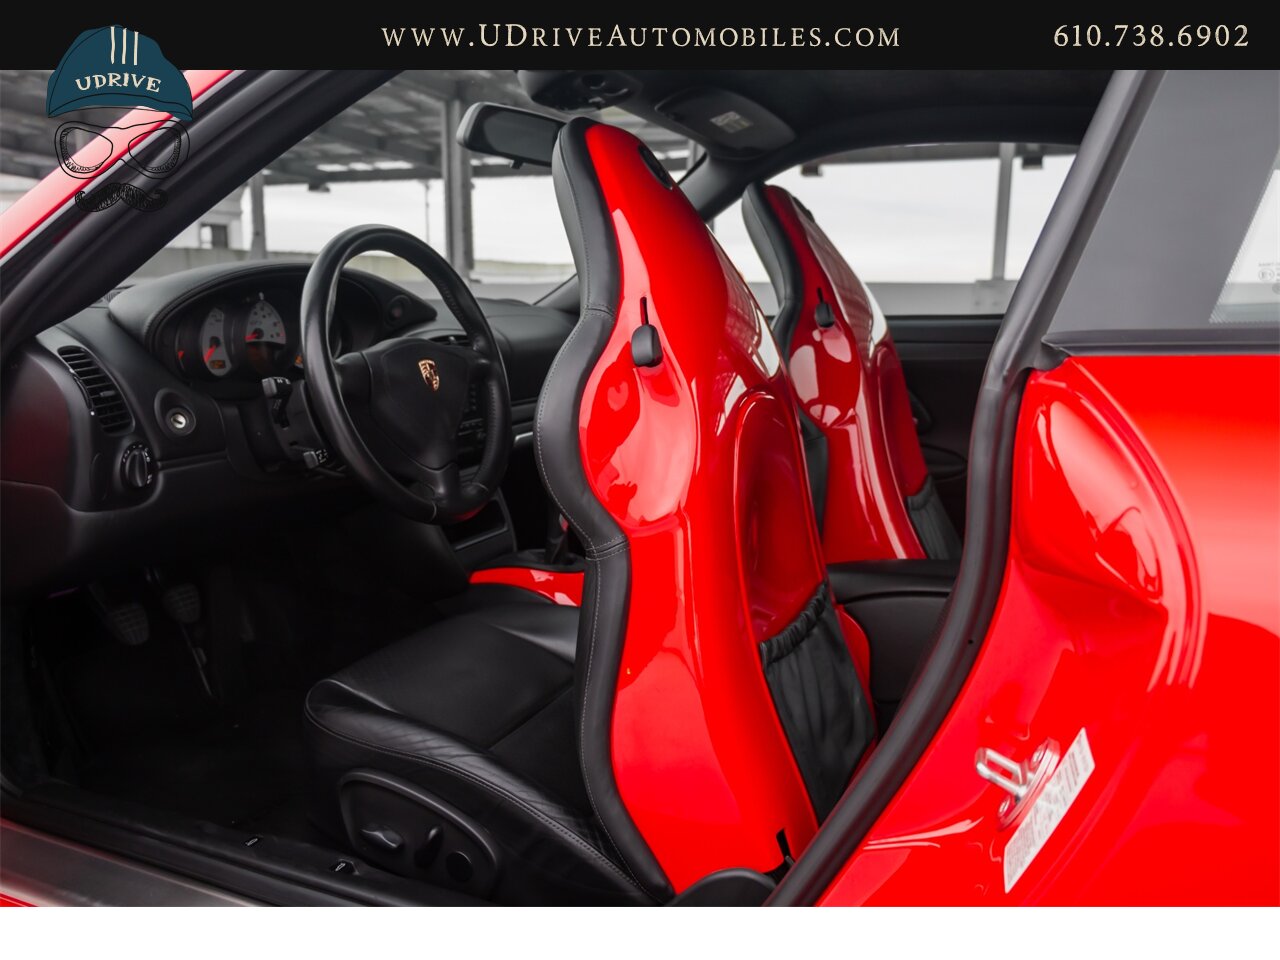 2004 Porsche 911 996 GT3 Guards Red Sport Seats Painted Hardbacks  Painted Center Console 18k Miles - Photo 31 - West Chester, PA 19382